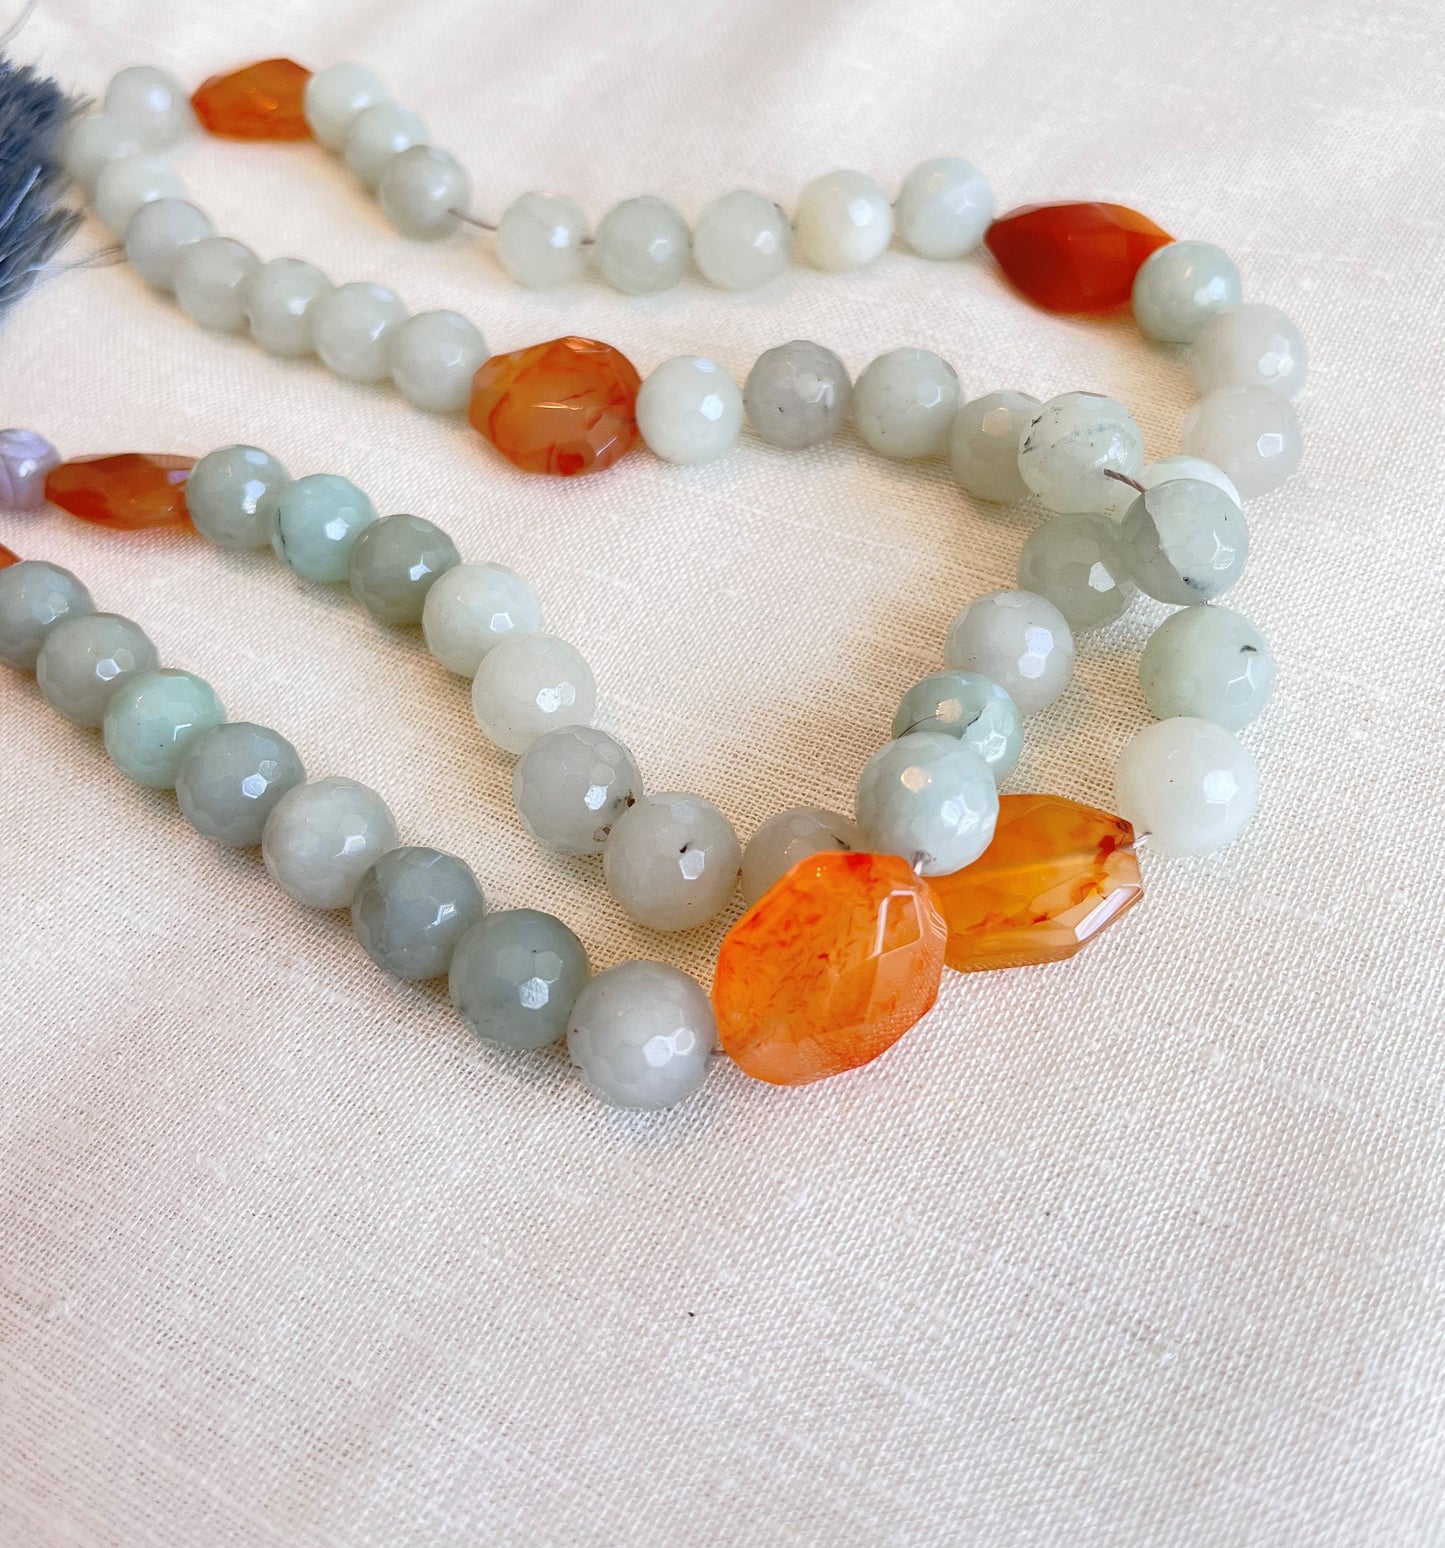 Grey Faceted Agate Paternoster with Orange Carnelian Gauds